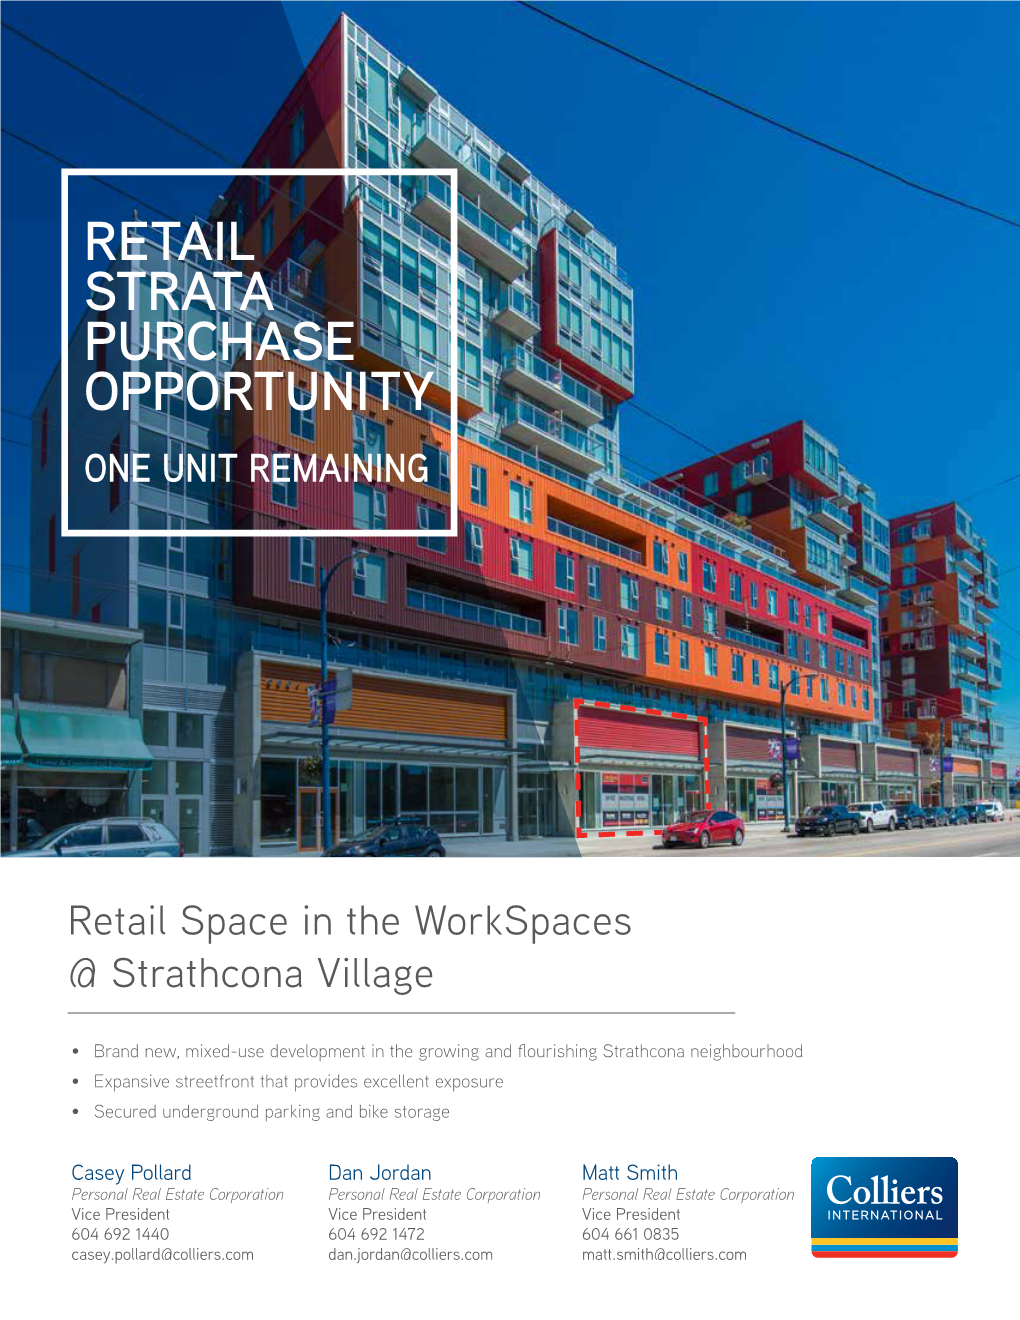 Retail Strata Purchase Opportunity One Unit Remaining